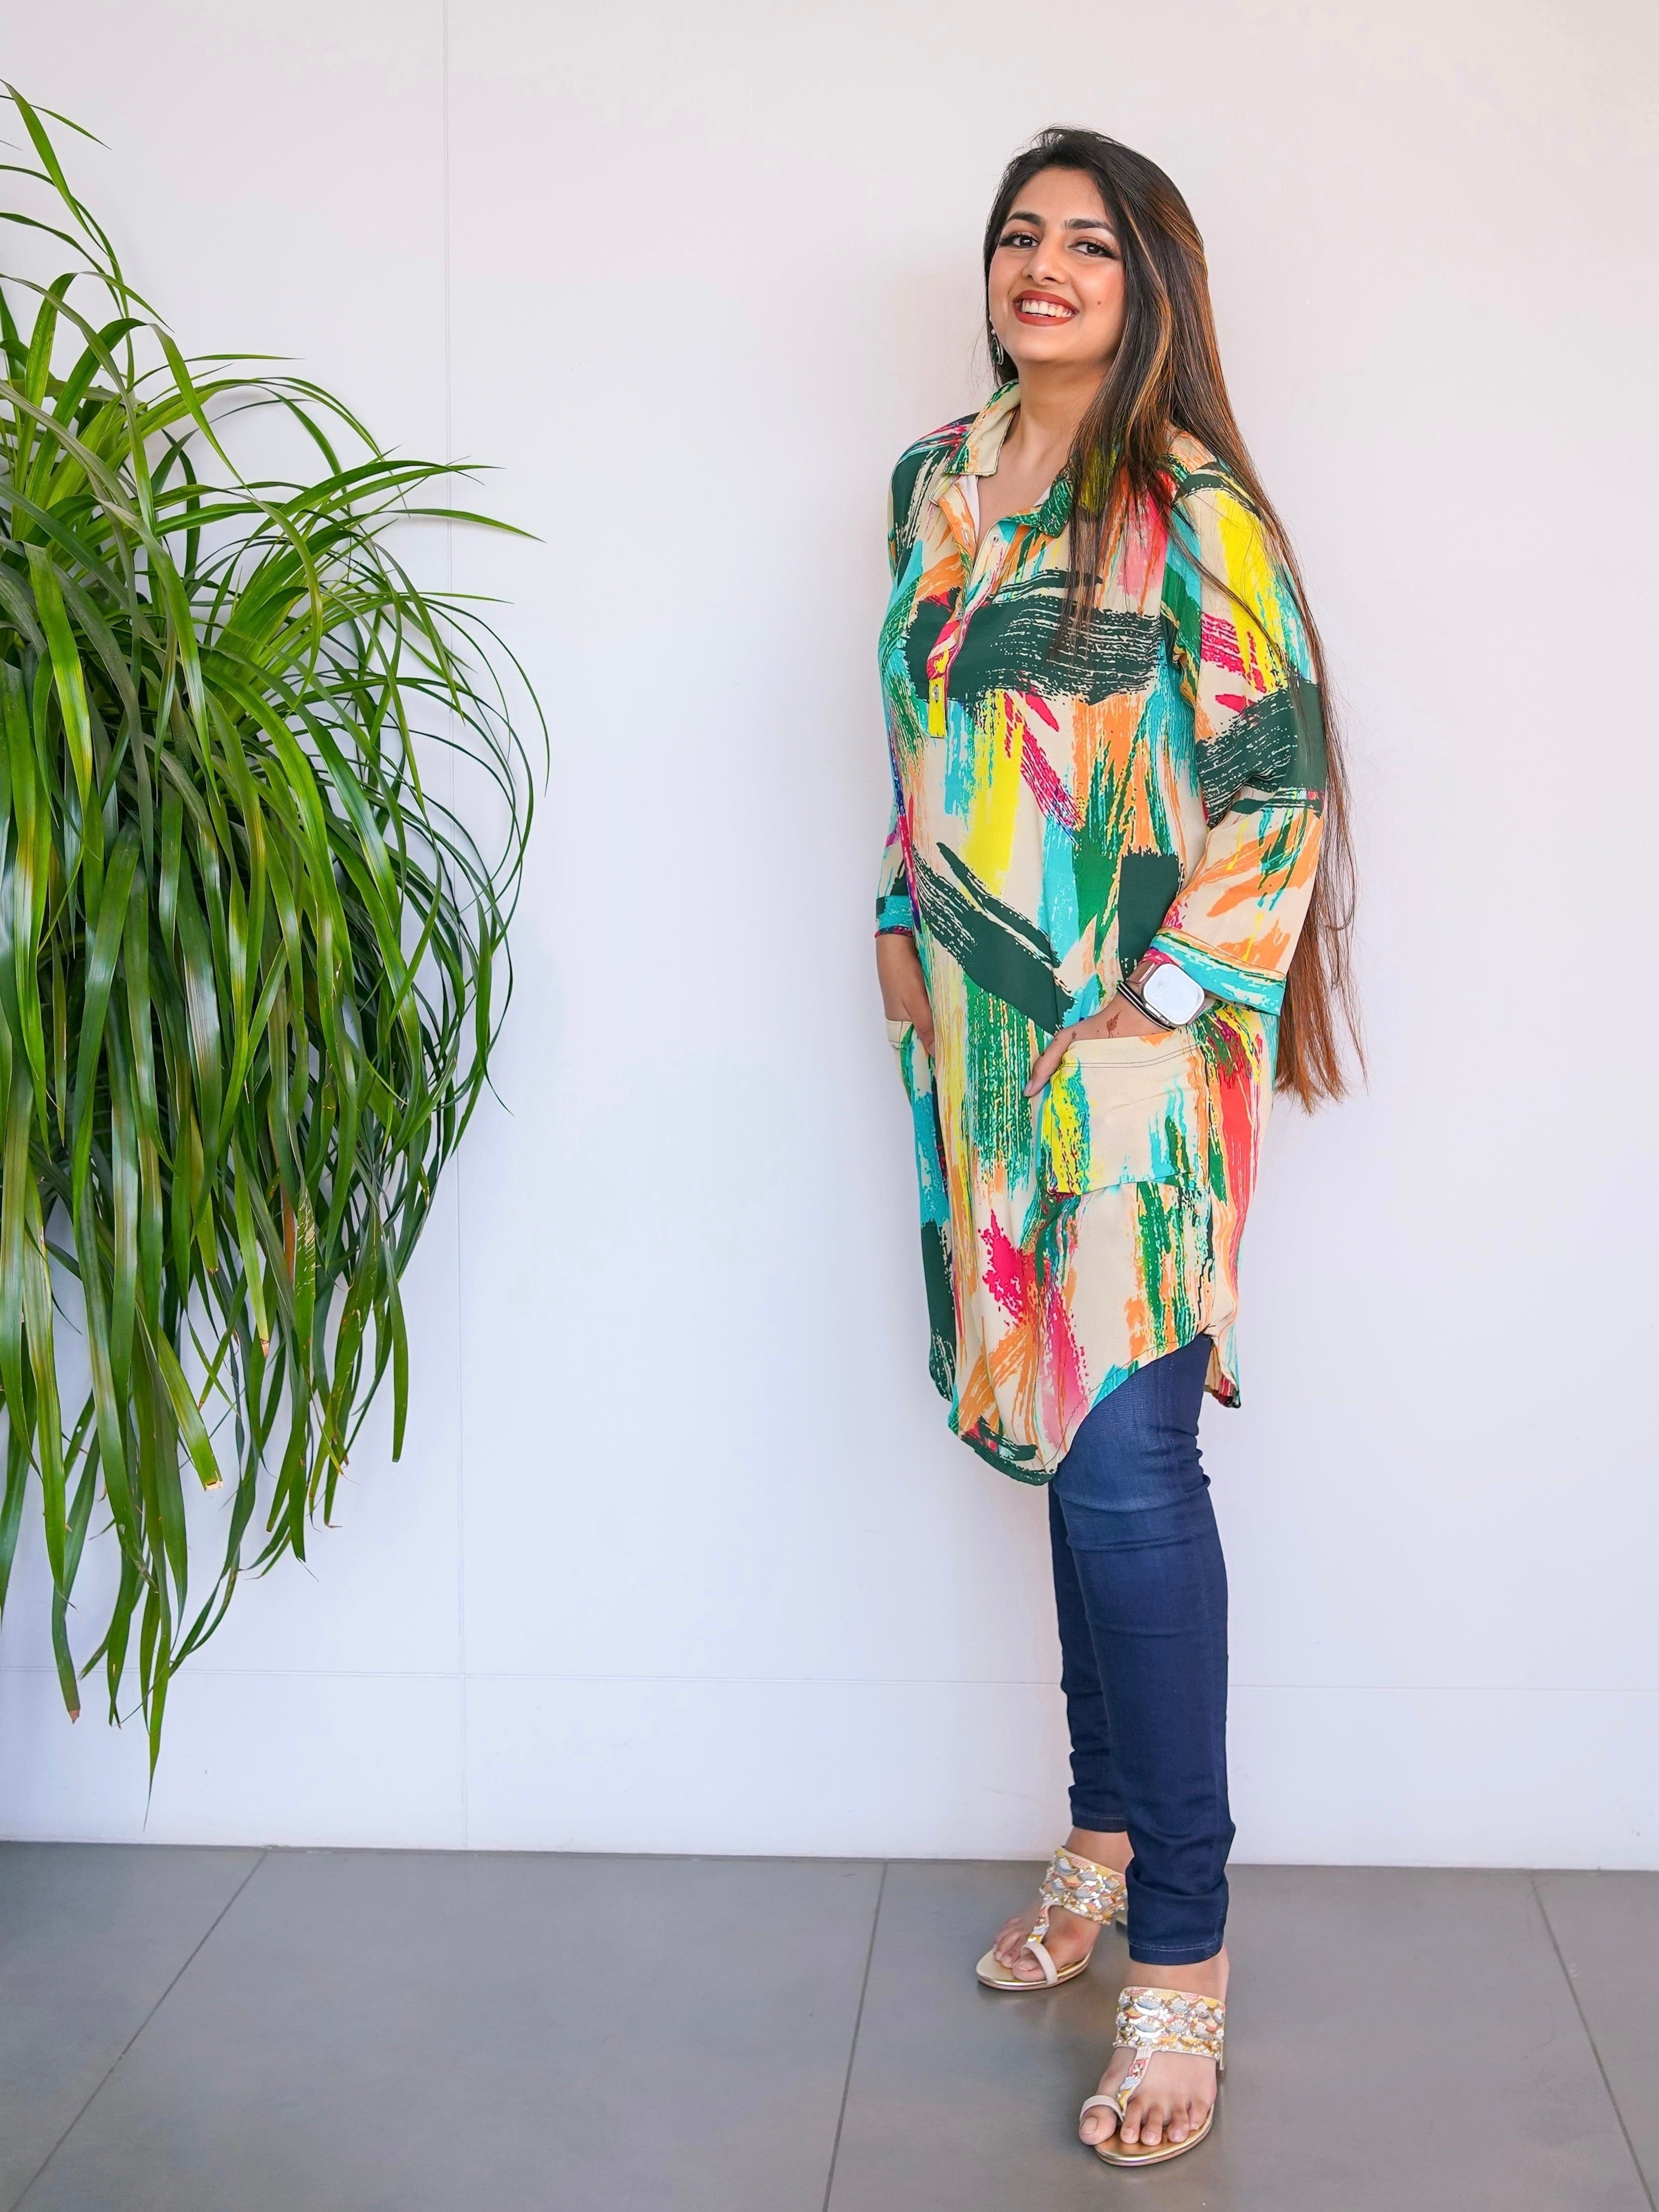 Jeeaayanu: Shop Indian Ethnic Wear for Women in All Sizes